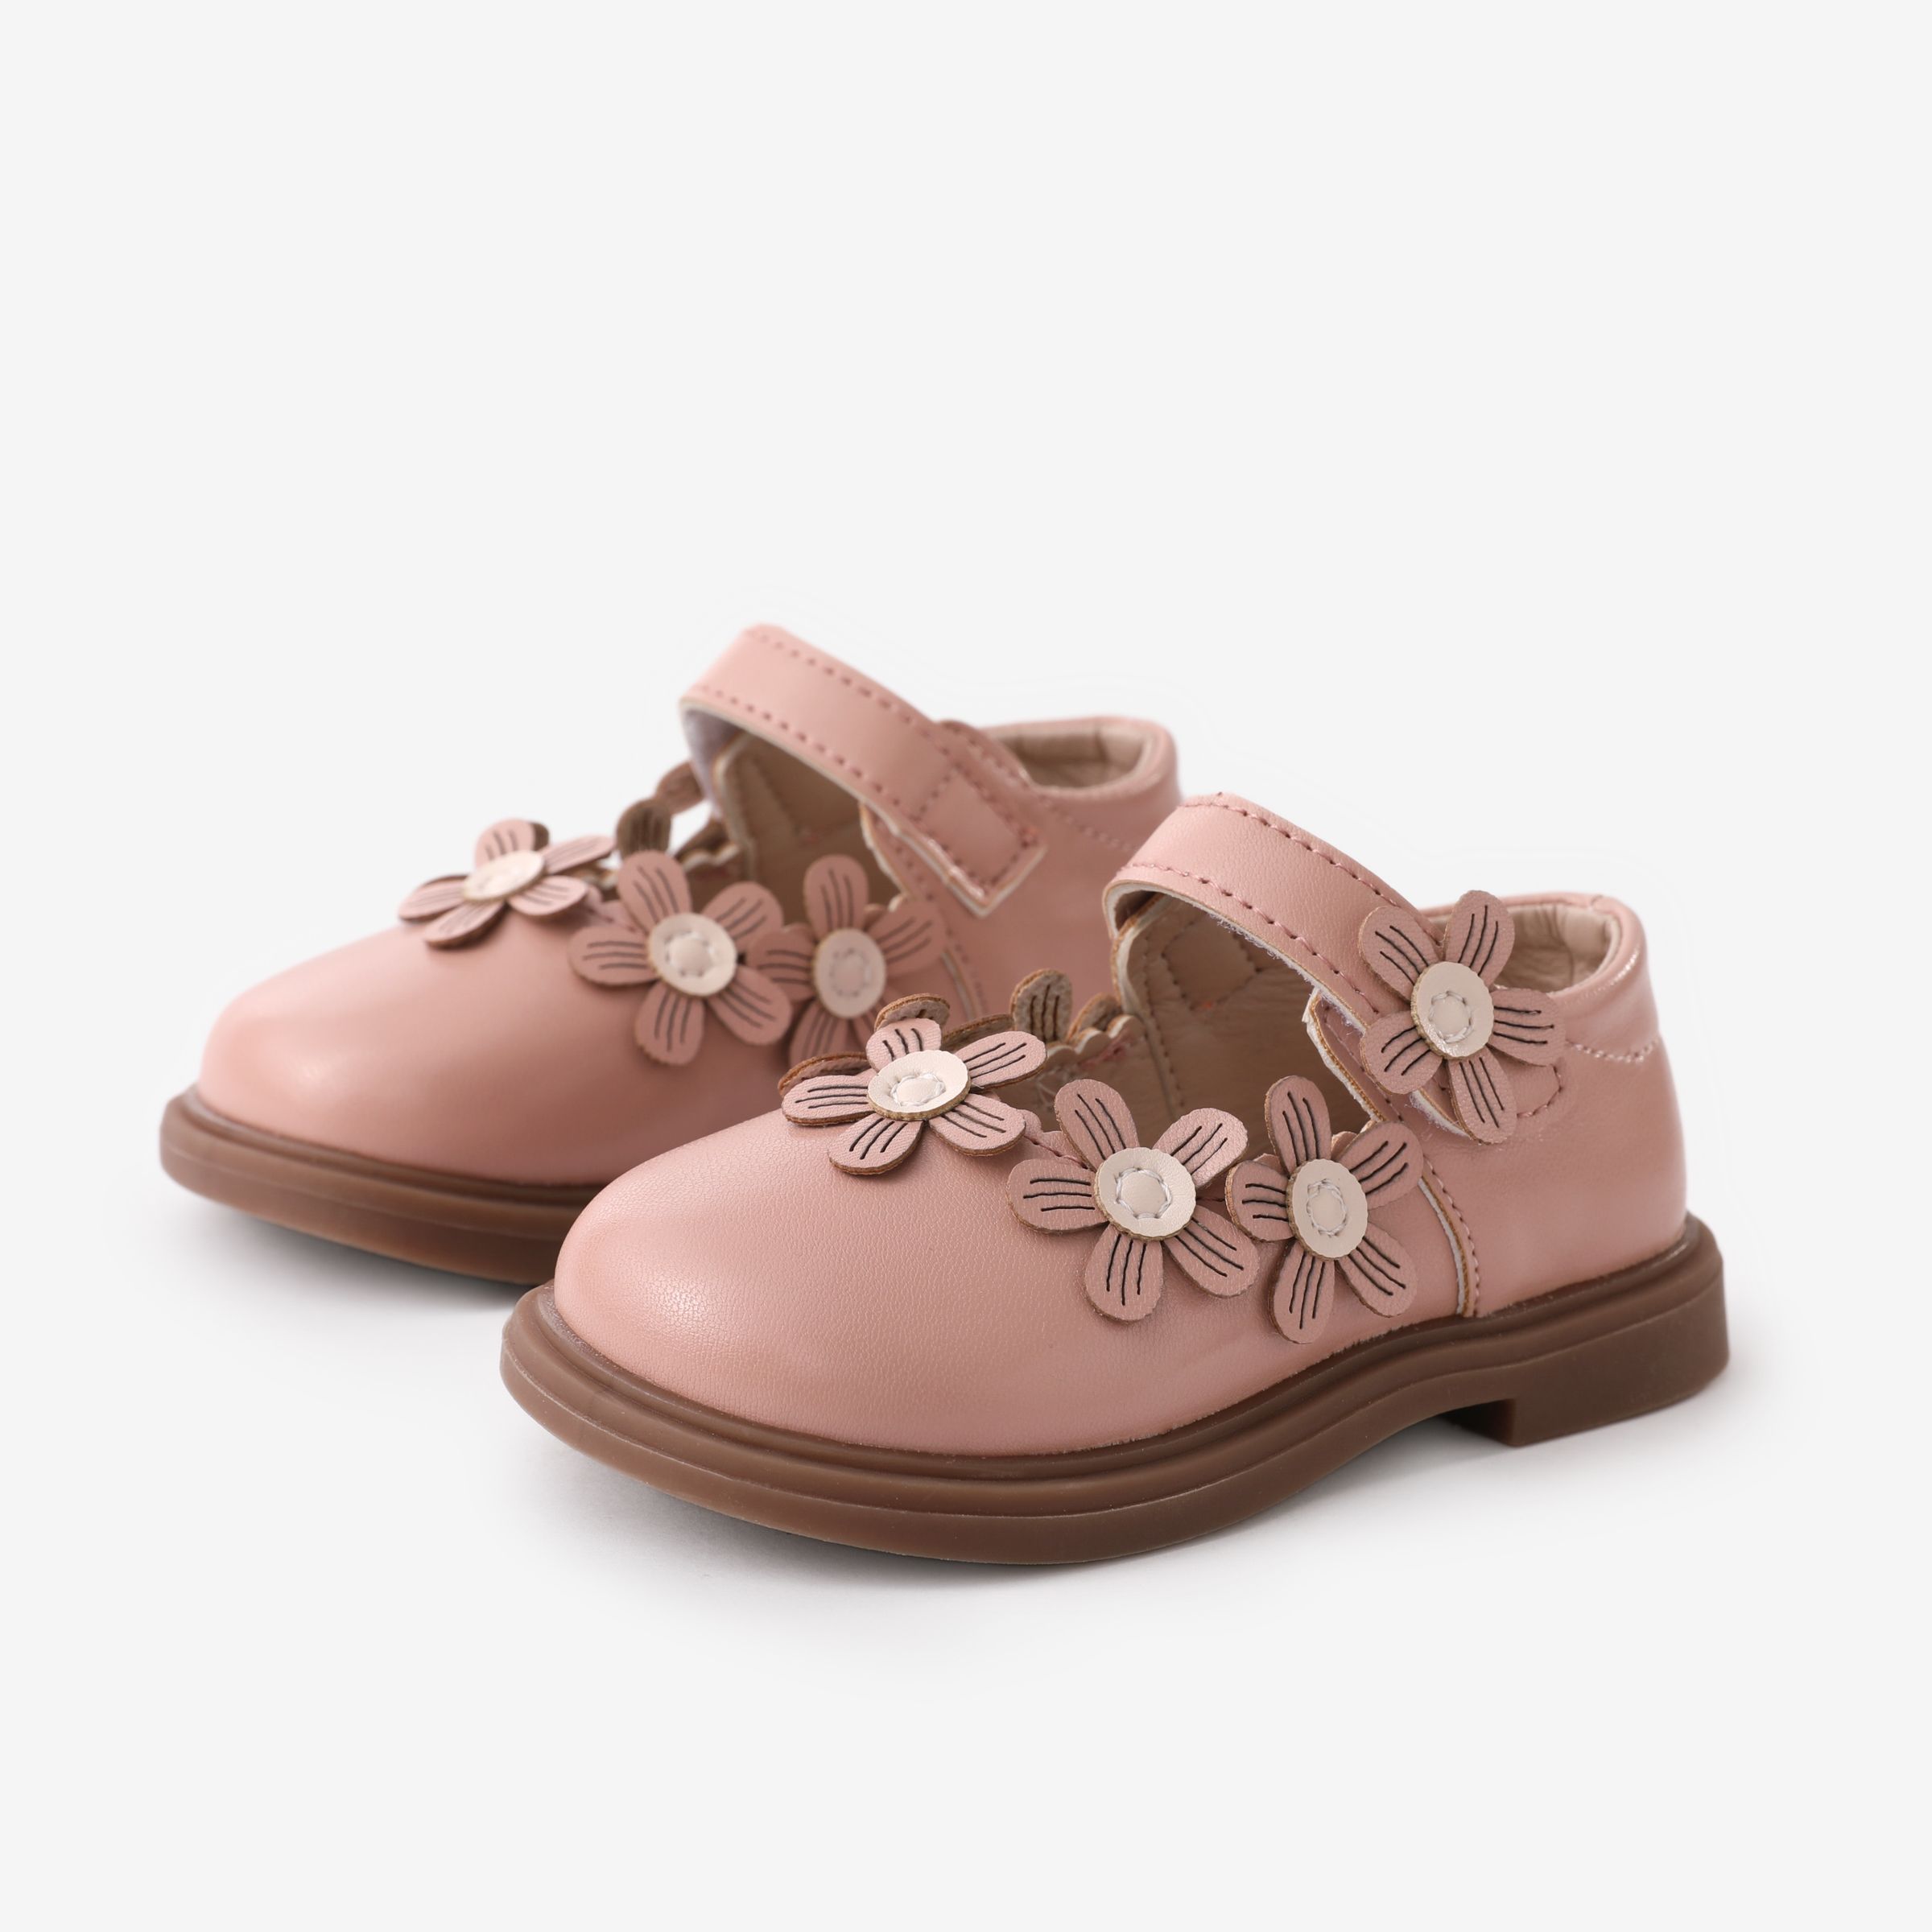 Toddler And Kids Sweet 3D Floral Decor Velcro Leather Shoes